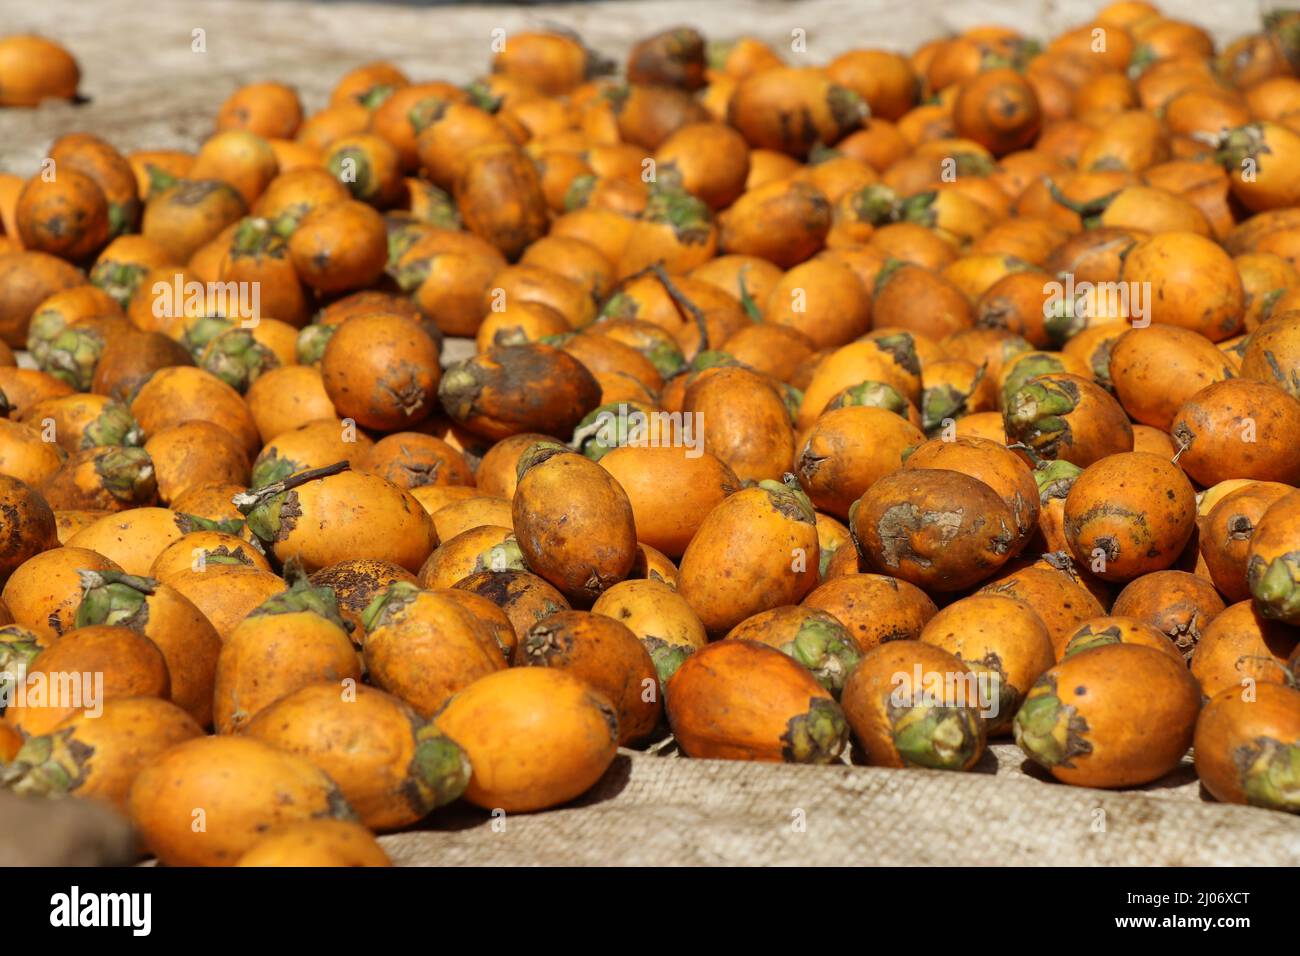 Sun-drying freshly harvested areca nut or betel nut palm or sometimes called chewing nut Stock Photo